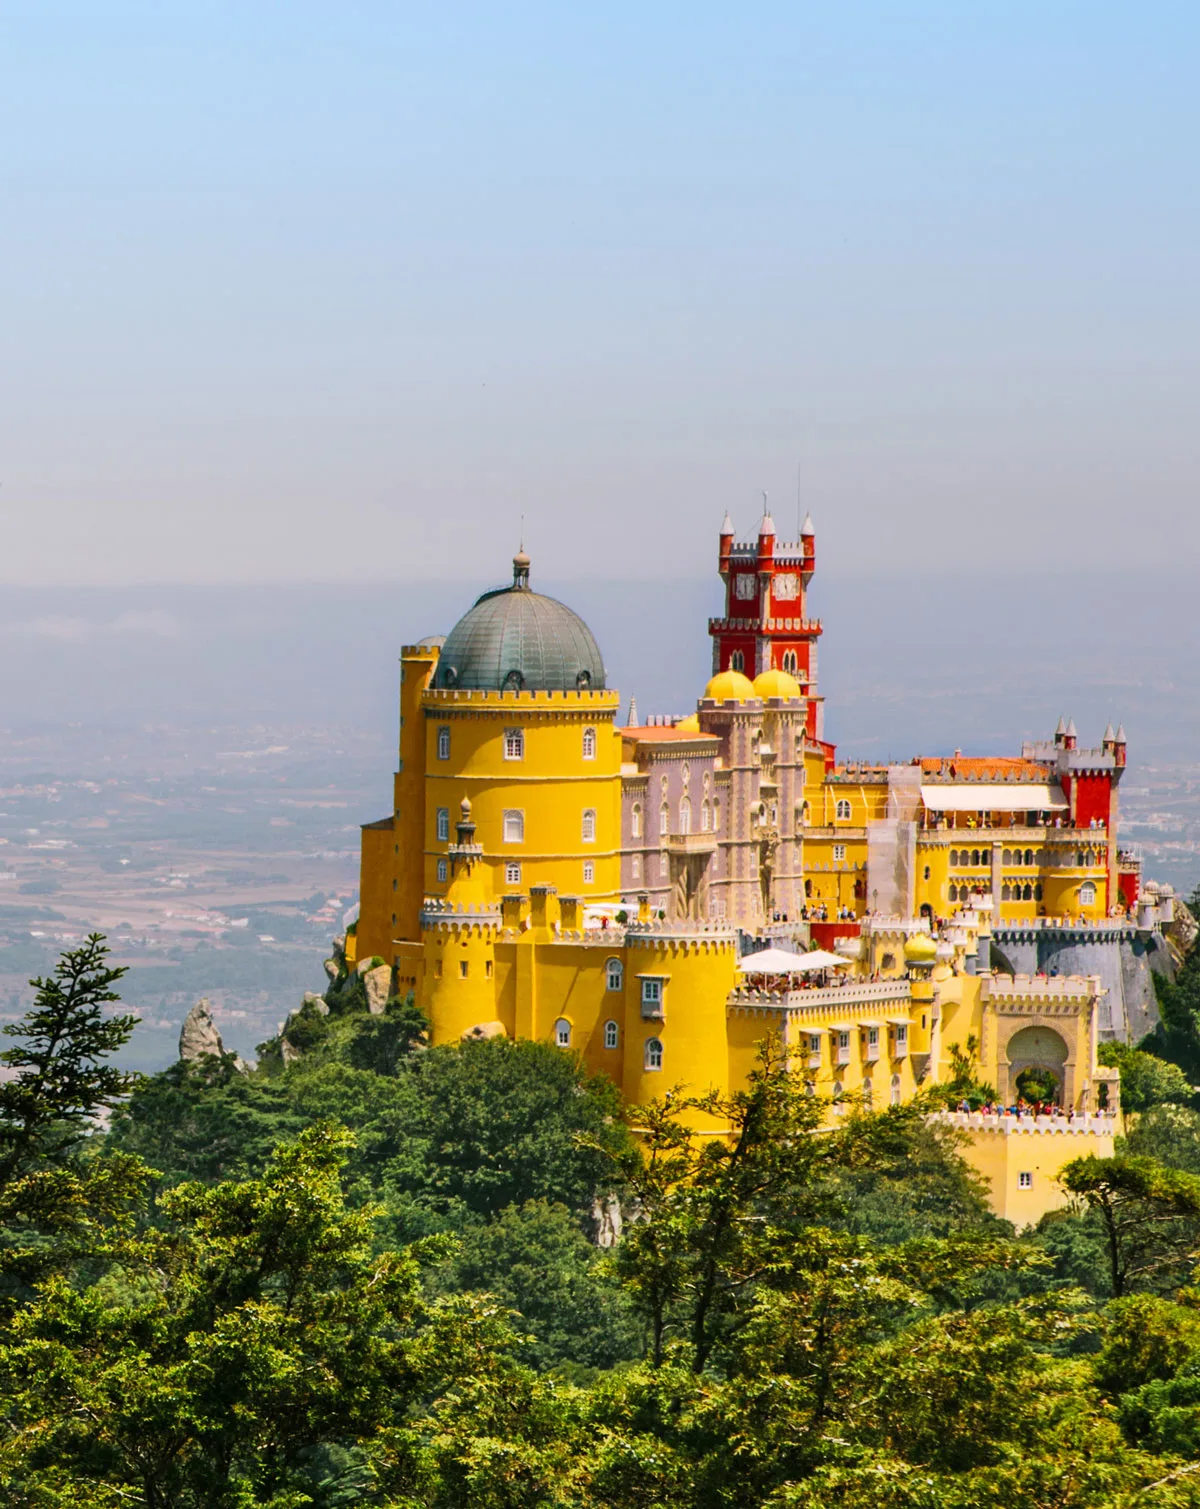 The brightly coloured fairytale style Pena Palace emerges from the green mountain top in Sintra Portugal.